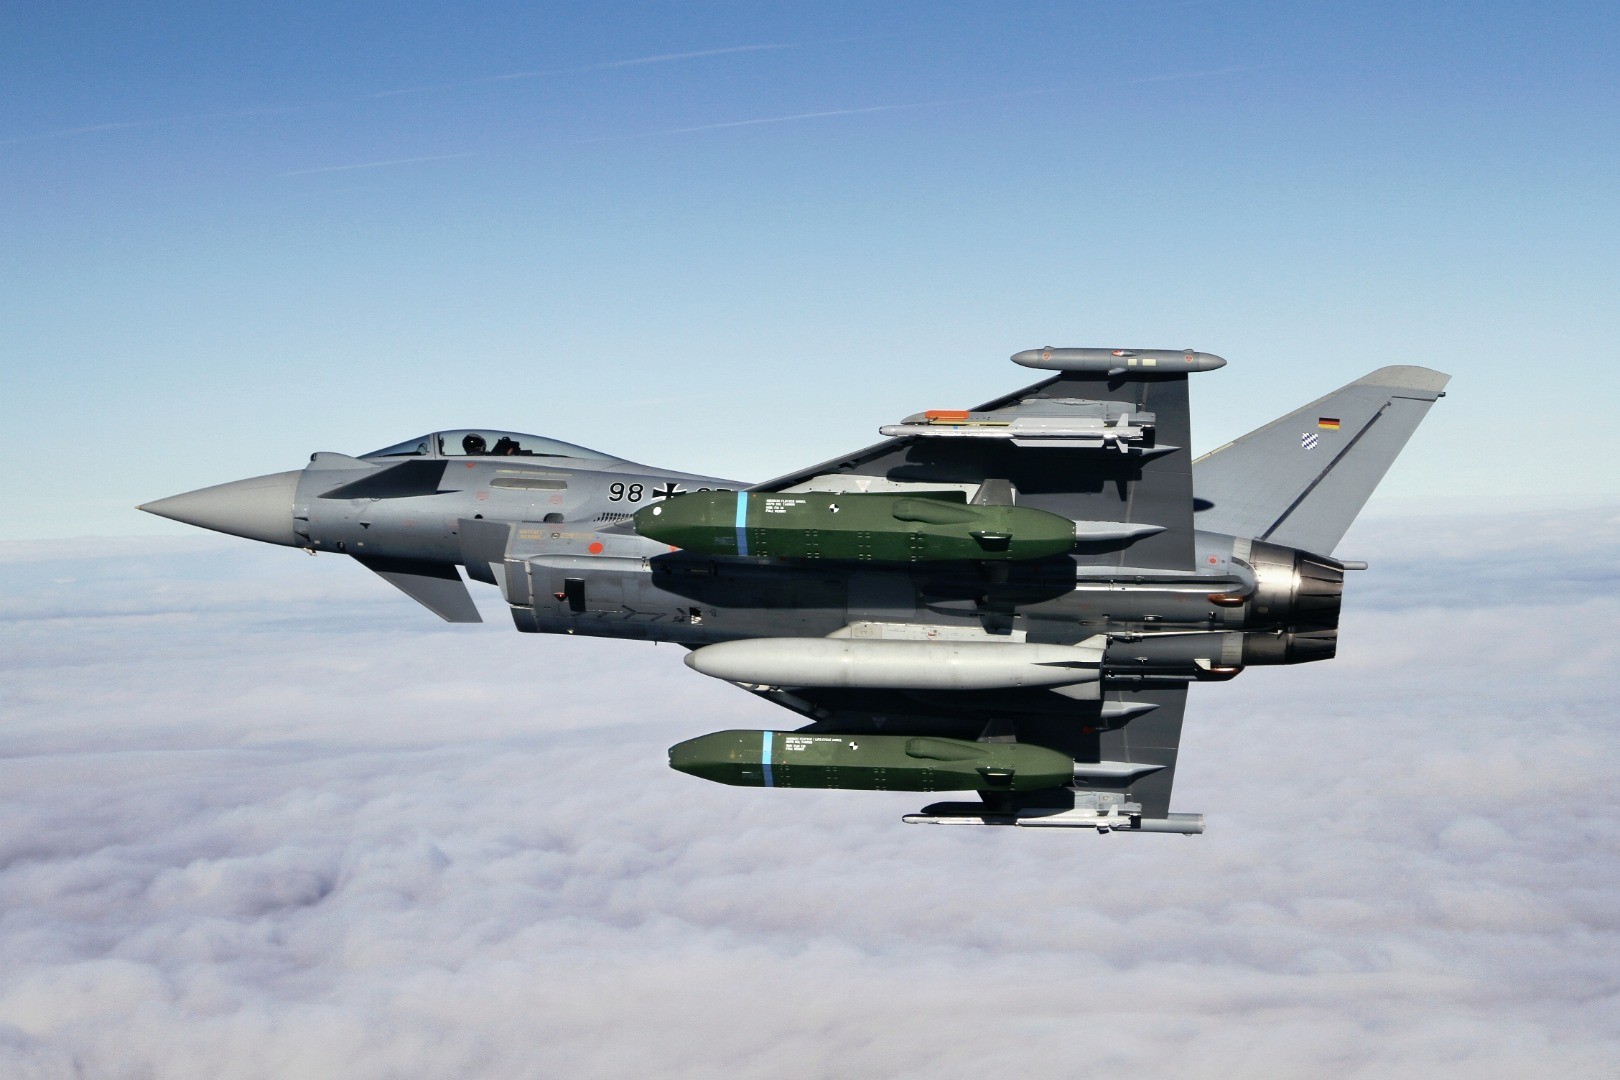 Eurofighter Typhoon German Army Military Aircraft Military Aircraft Vehicle 1620x1080